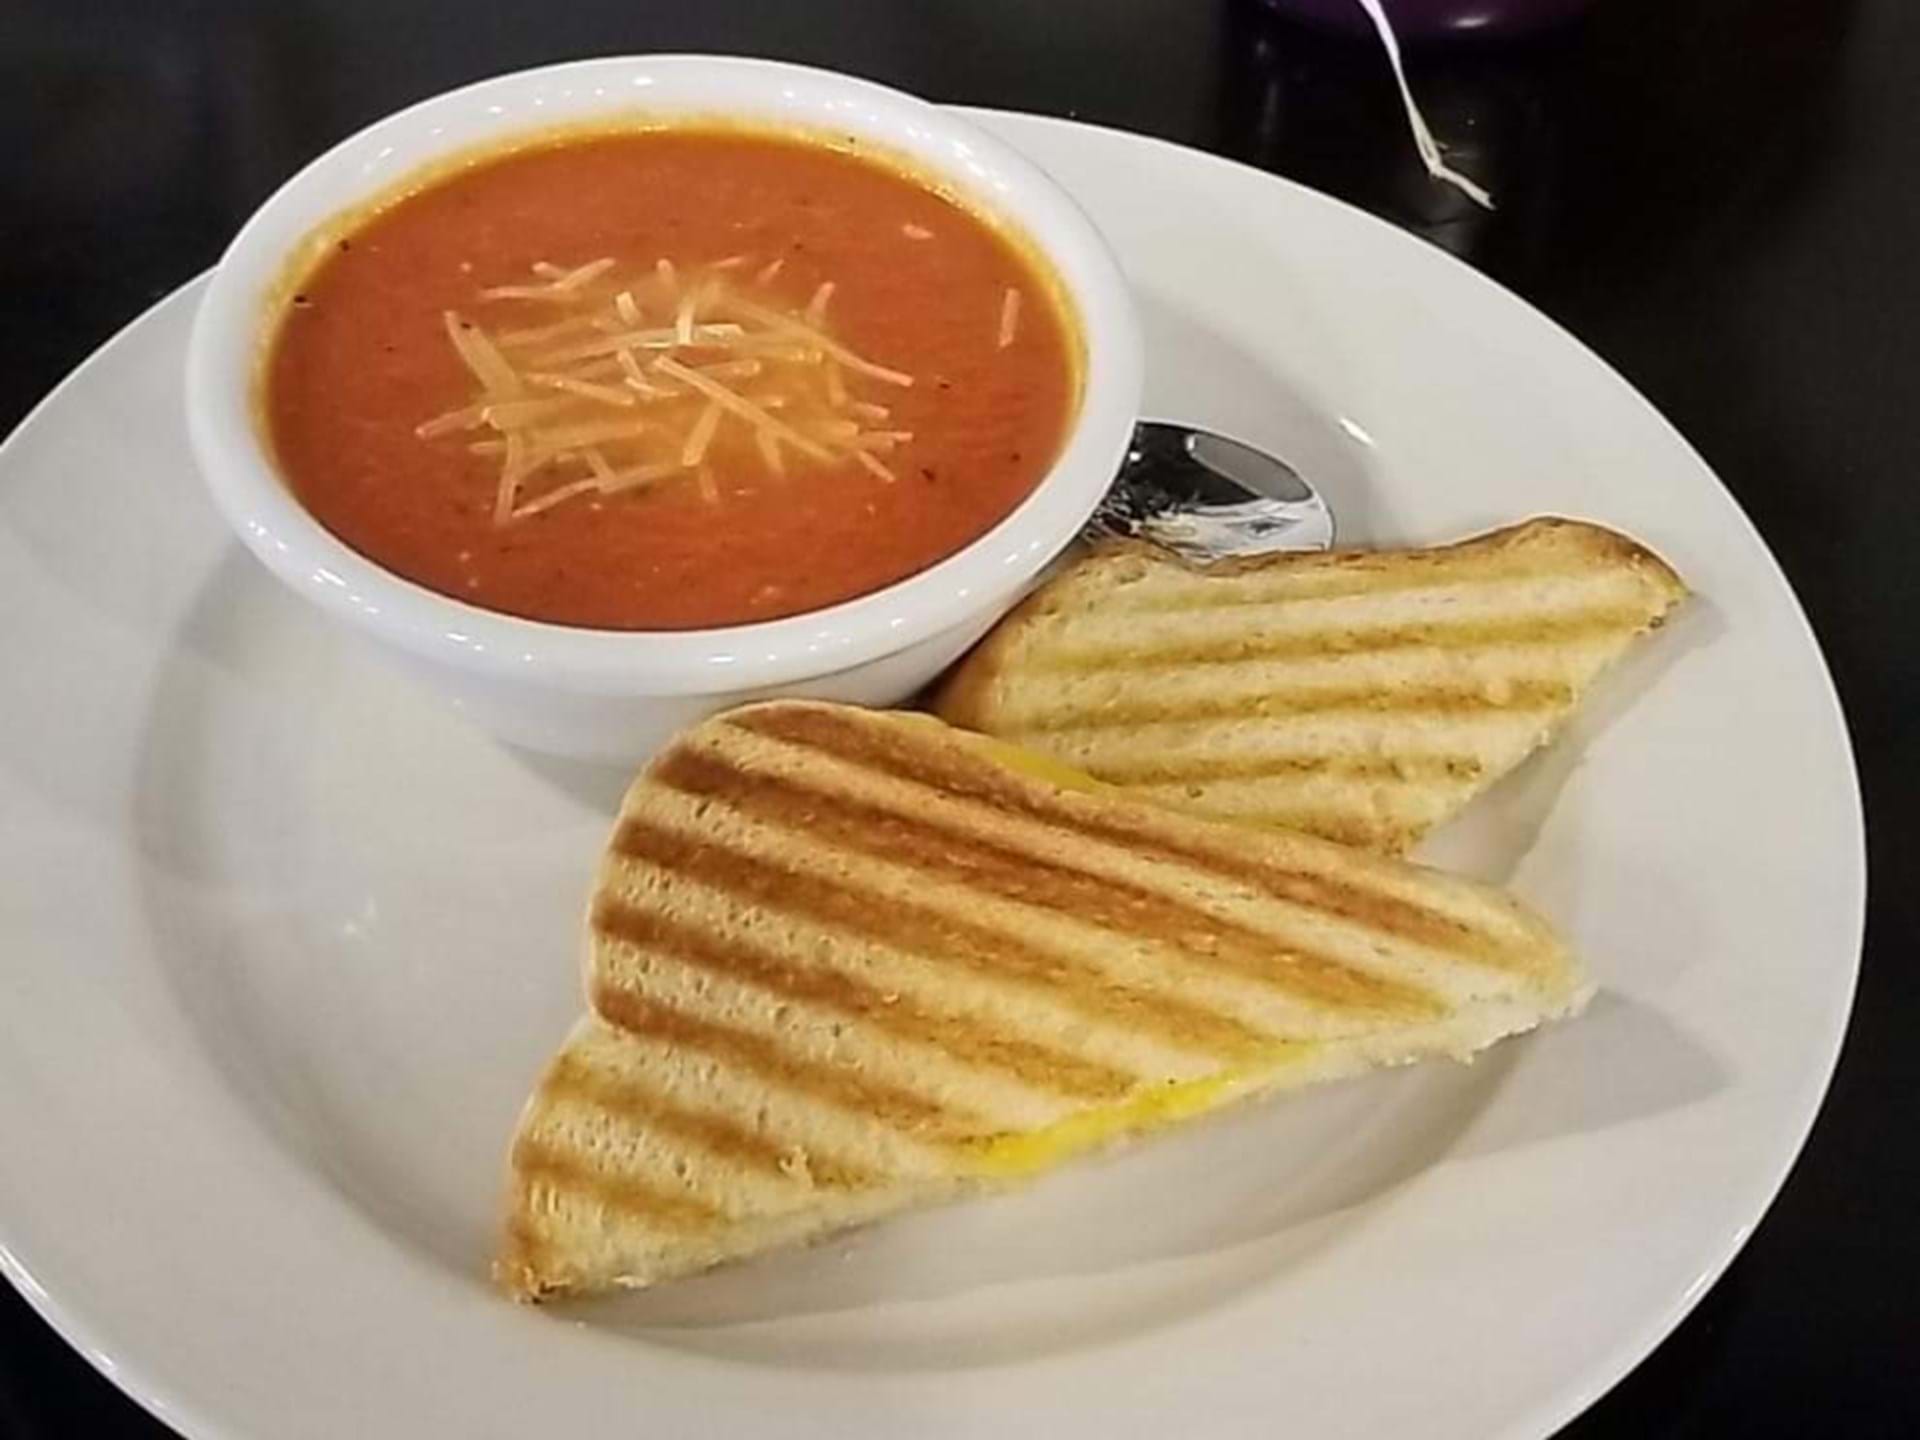 Made From Scratch Tomato Soup & Grilled Cheese